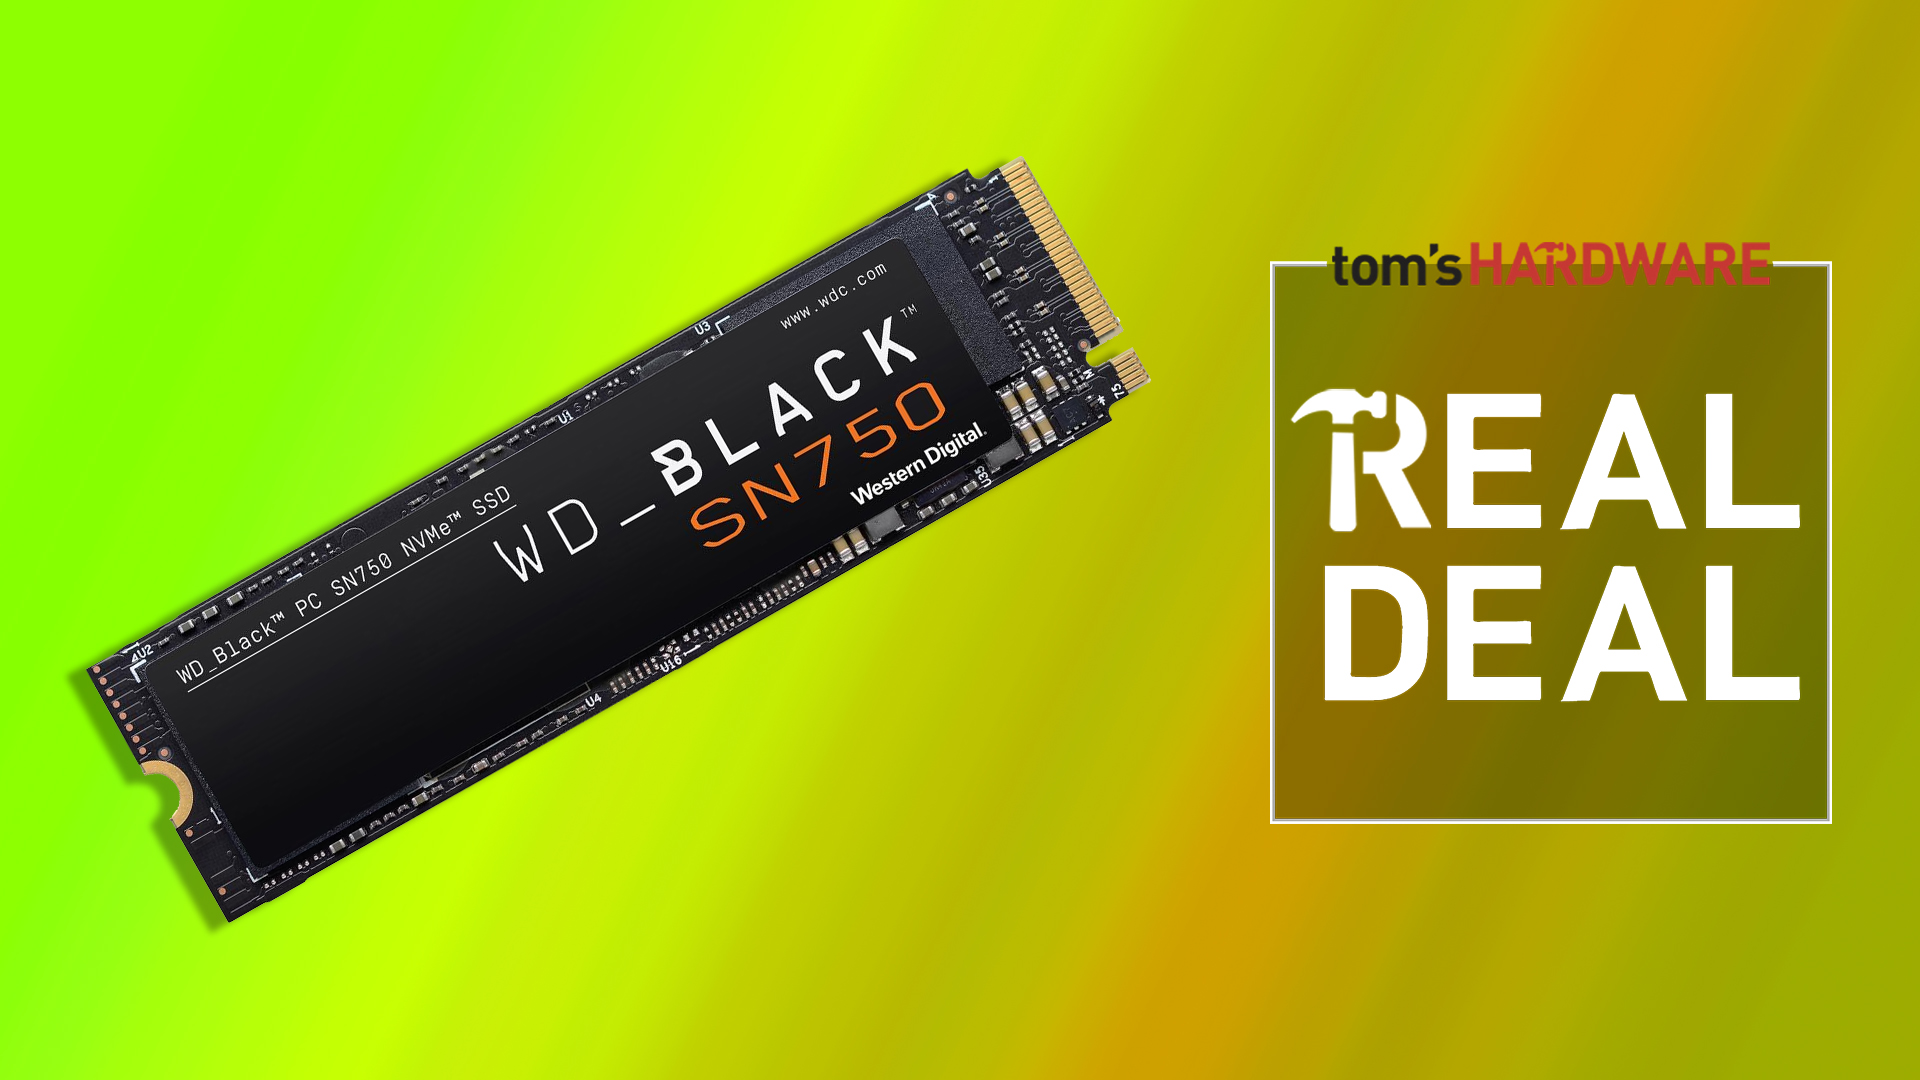 The Wd Black Sn750 Nvme Ssd Is Now Over Half Off Msrp Tom S Hardware